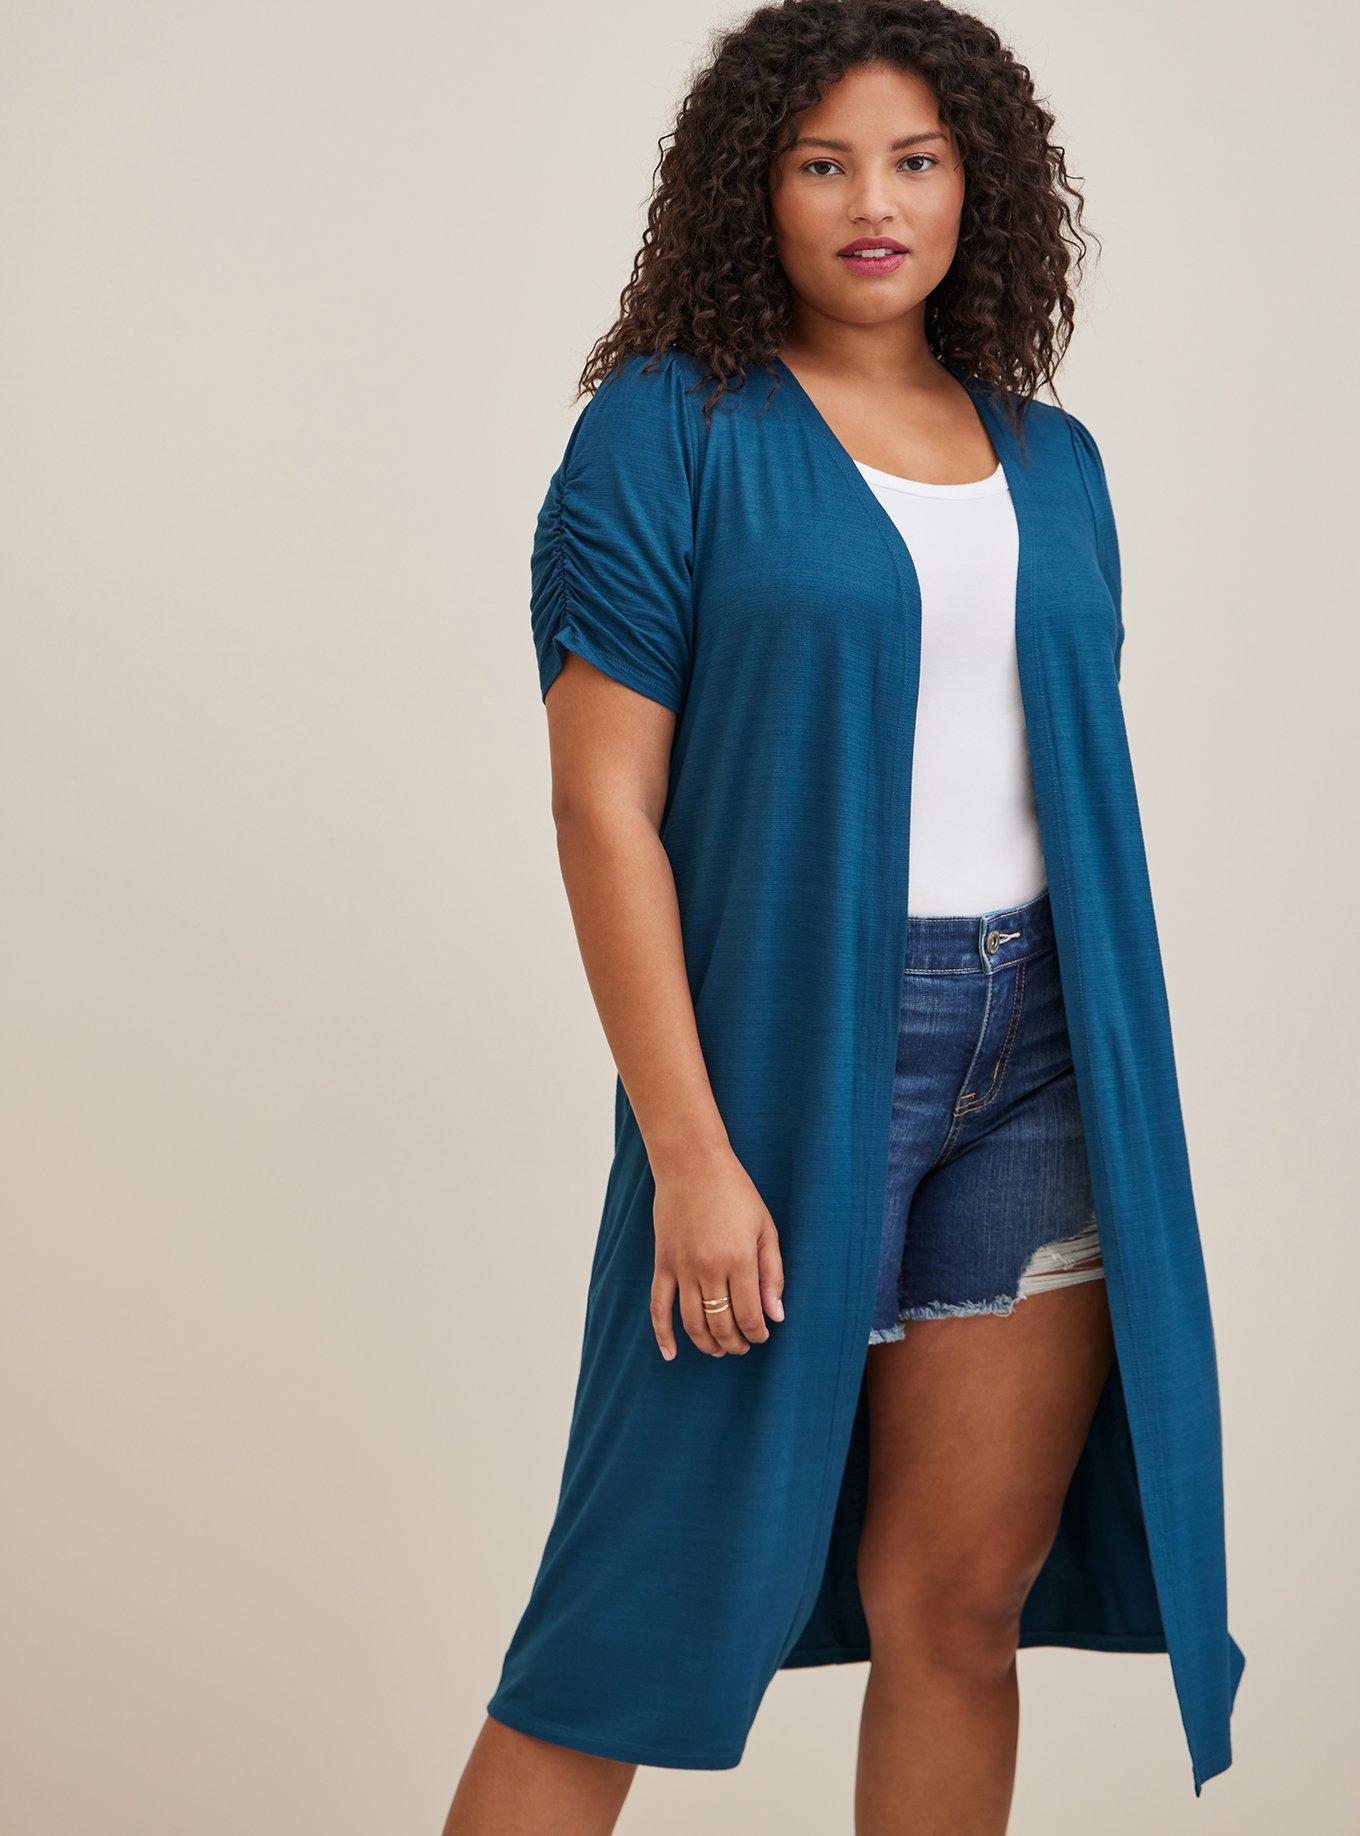 Plus Size Womens Dusters